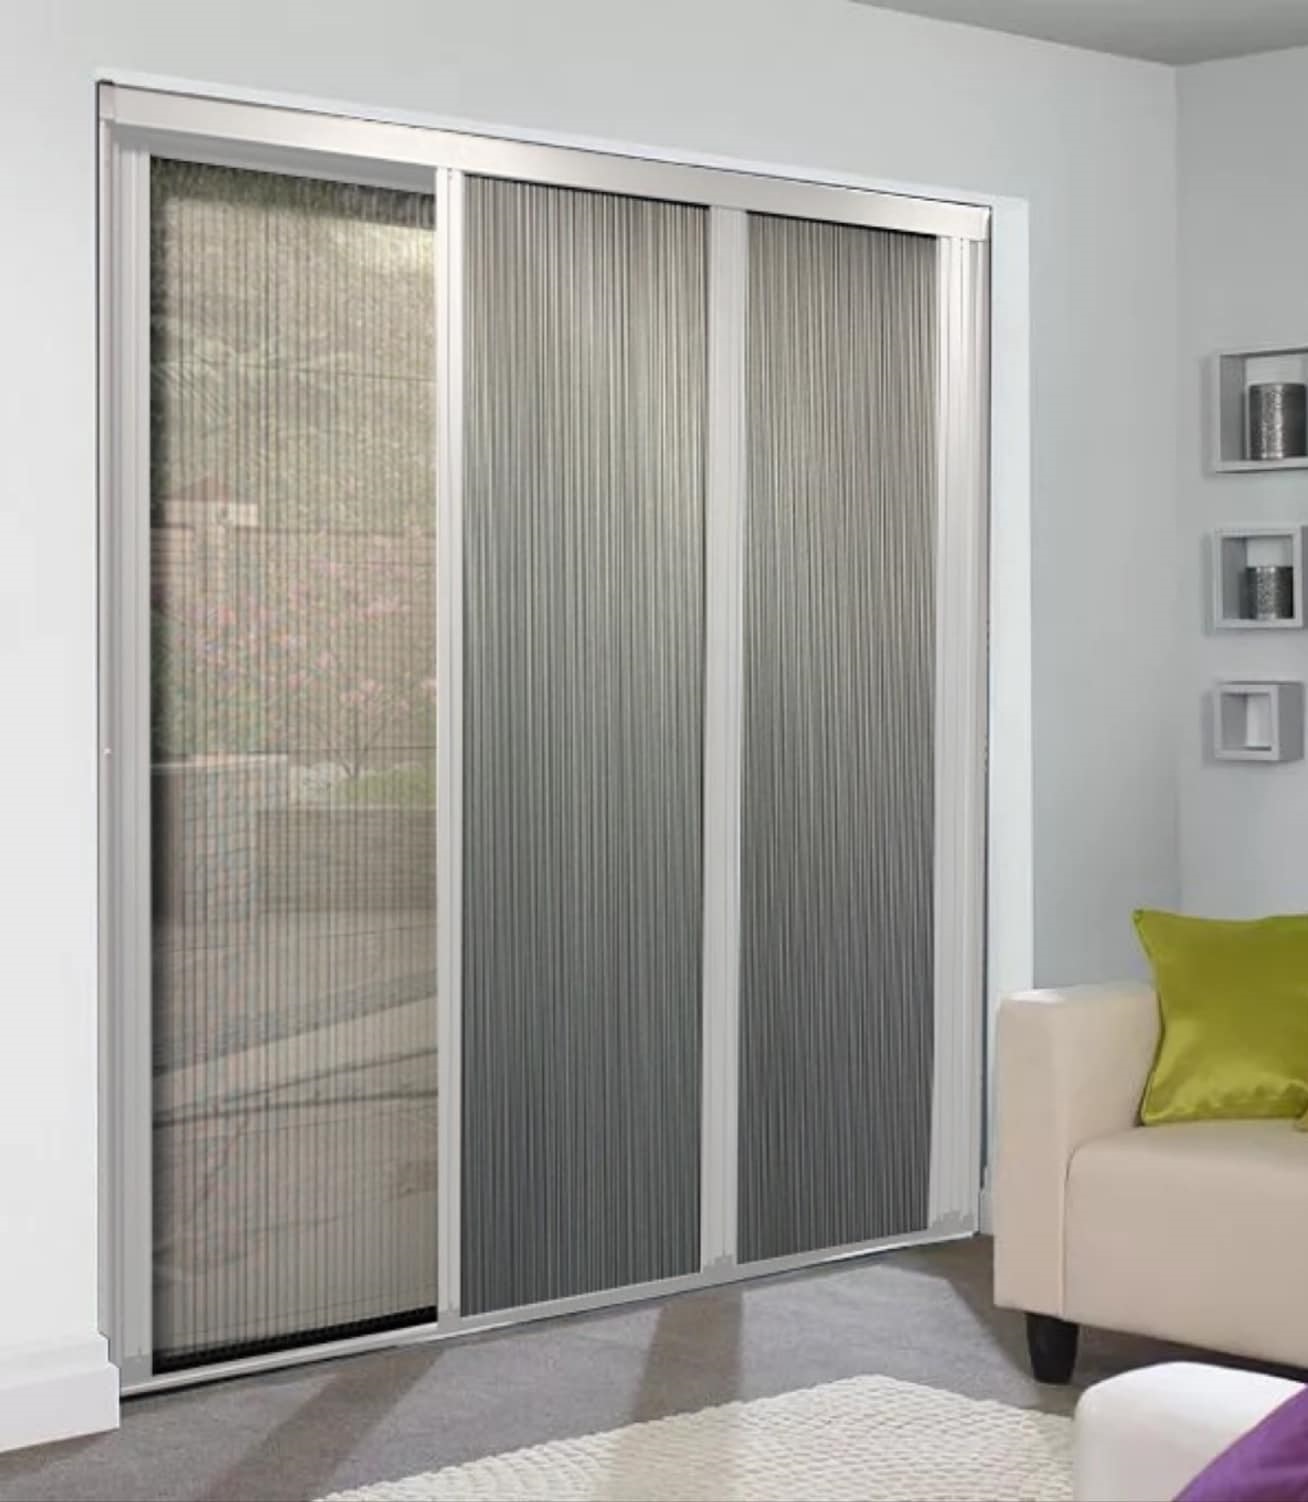 Blinds Screen for Sale in UK